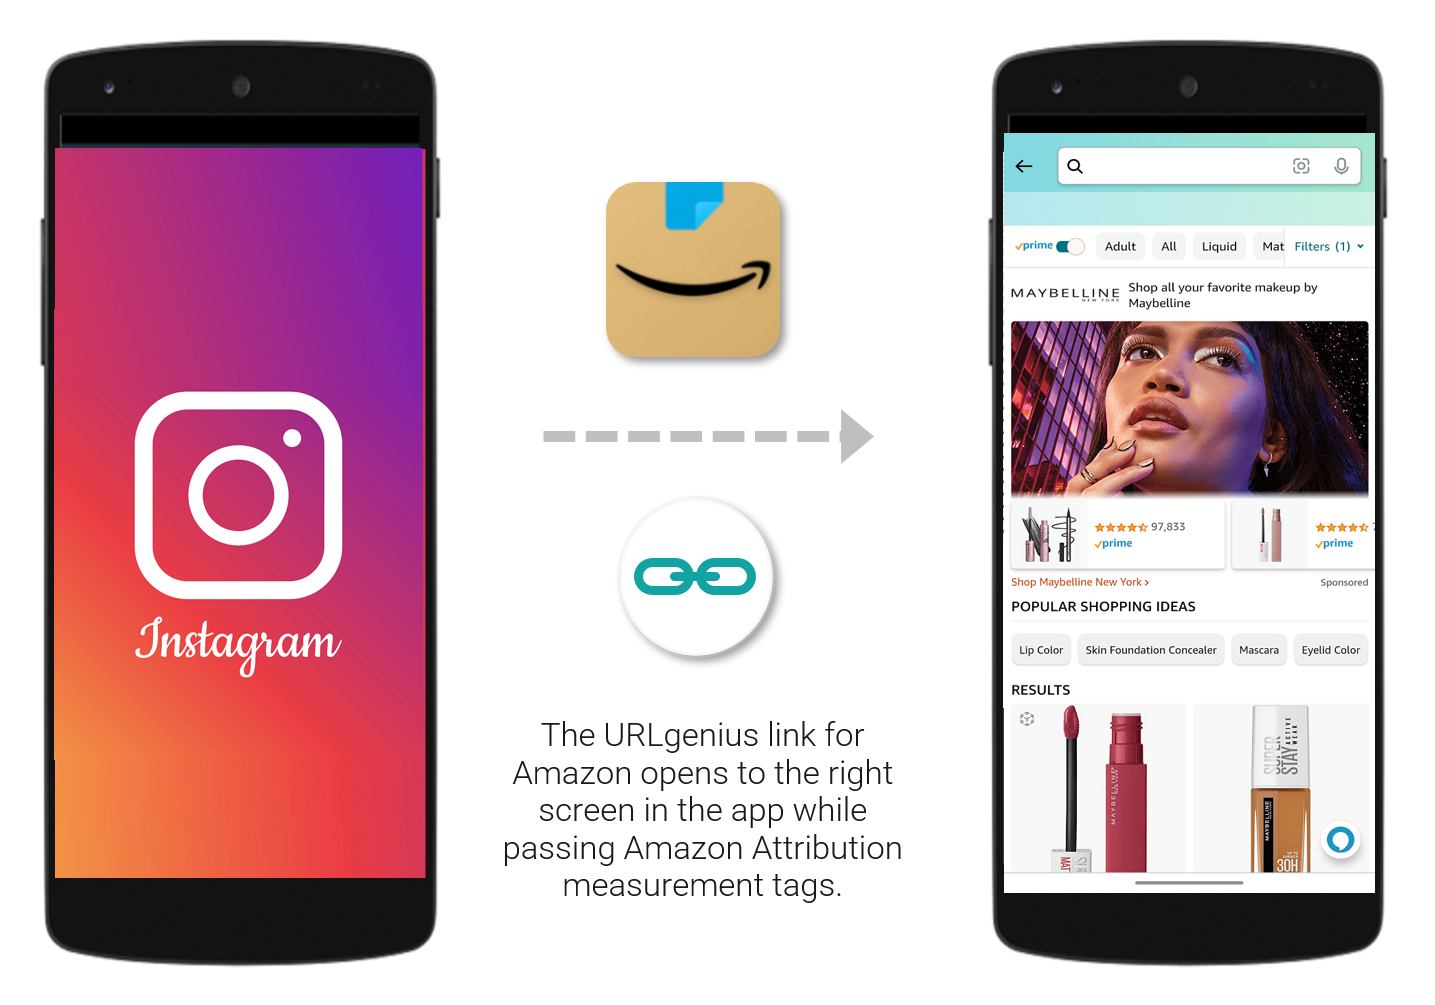 Graphical user interface, application

Description automatically generated

Link from the Instagram App to the Amazon App